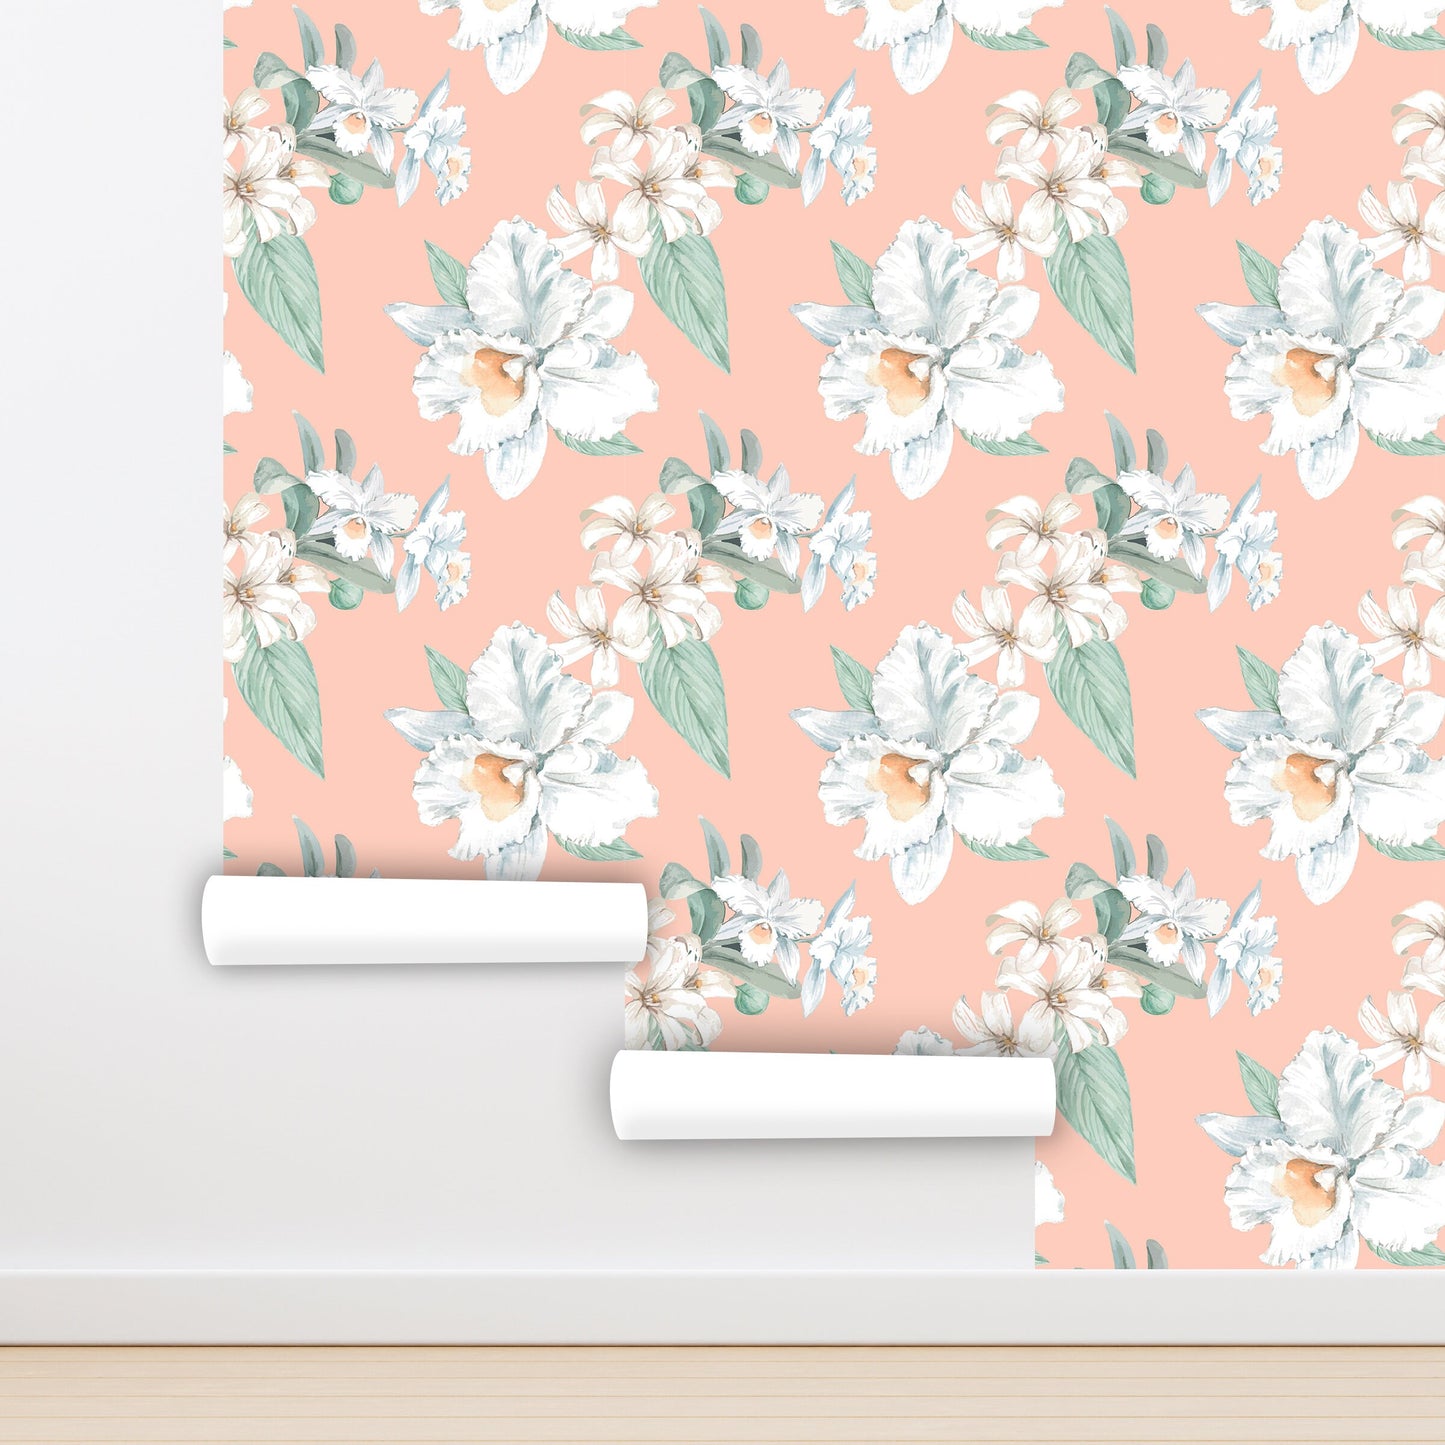 Orchid Wallpaper Peel and Stick, Peach Floral Wallpaper, Tropical Wallpaper, Removable Wall Paper